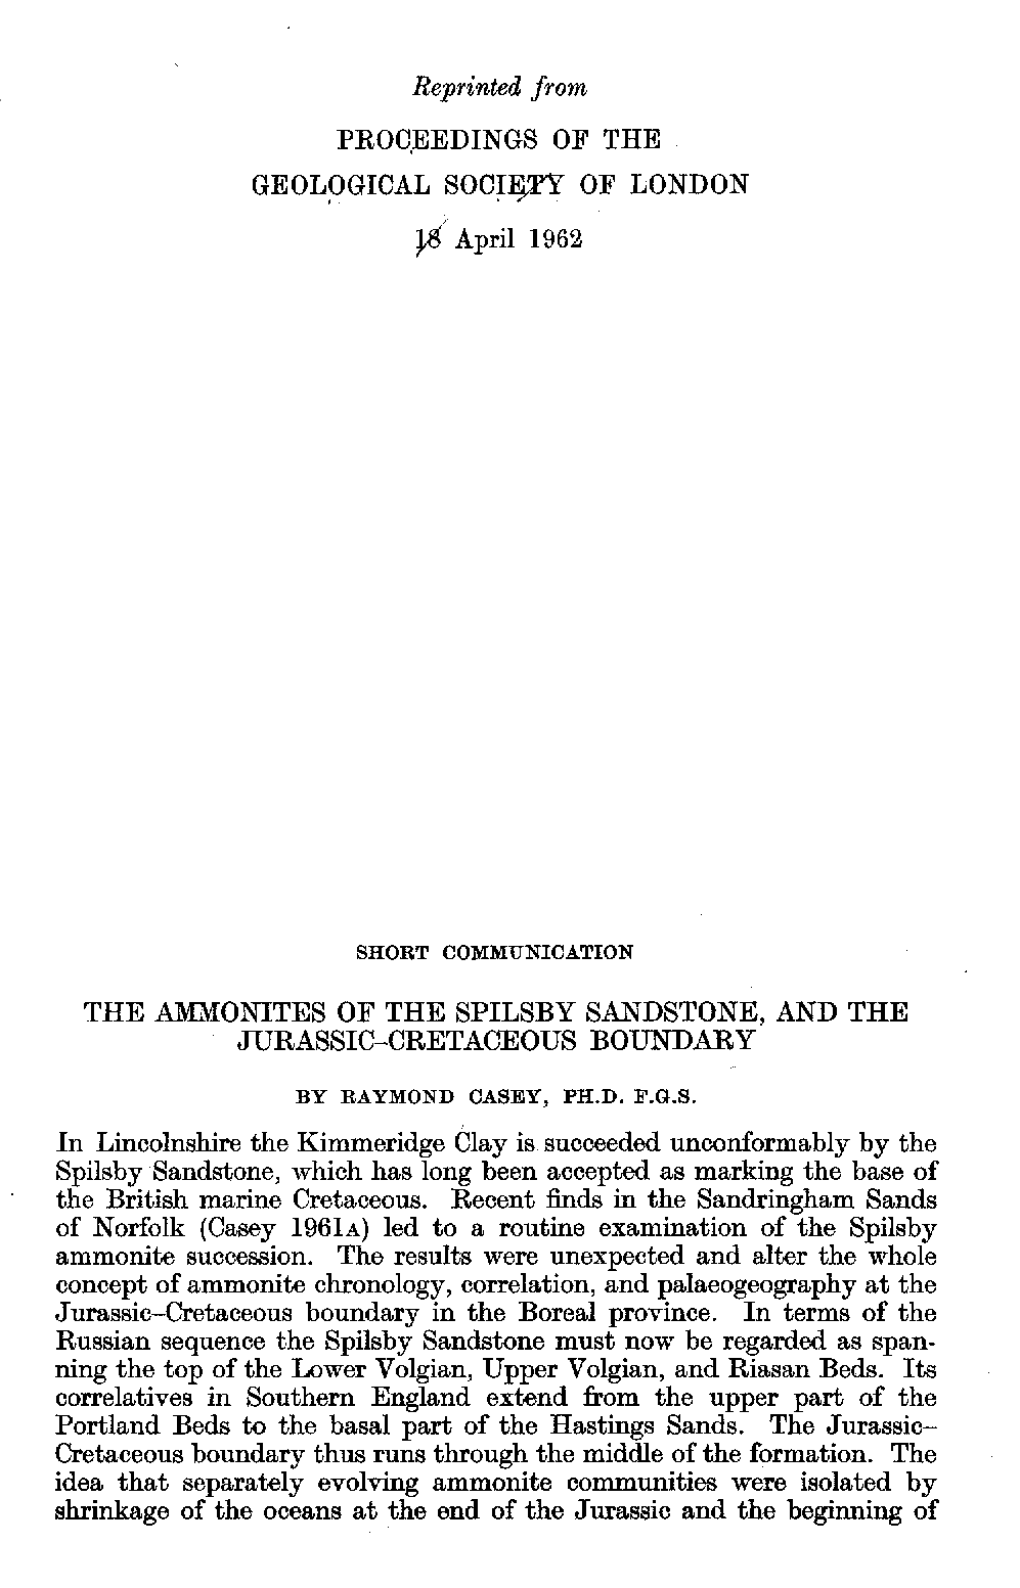 Reprinted from PROC,EEDINGS of the GEOLOGICAL Socil$PY of LONDON P' April 1962 the AMXONITES of the SPILSBY Smdstone, and the JU